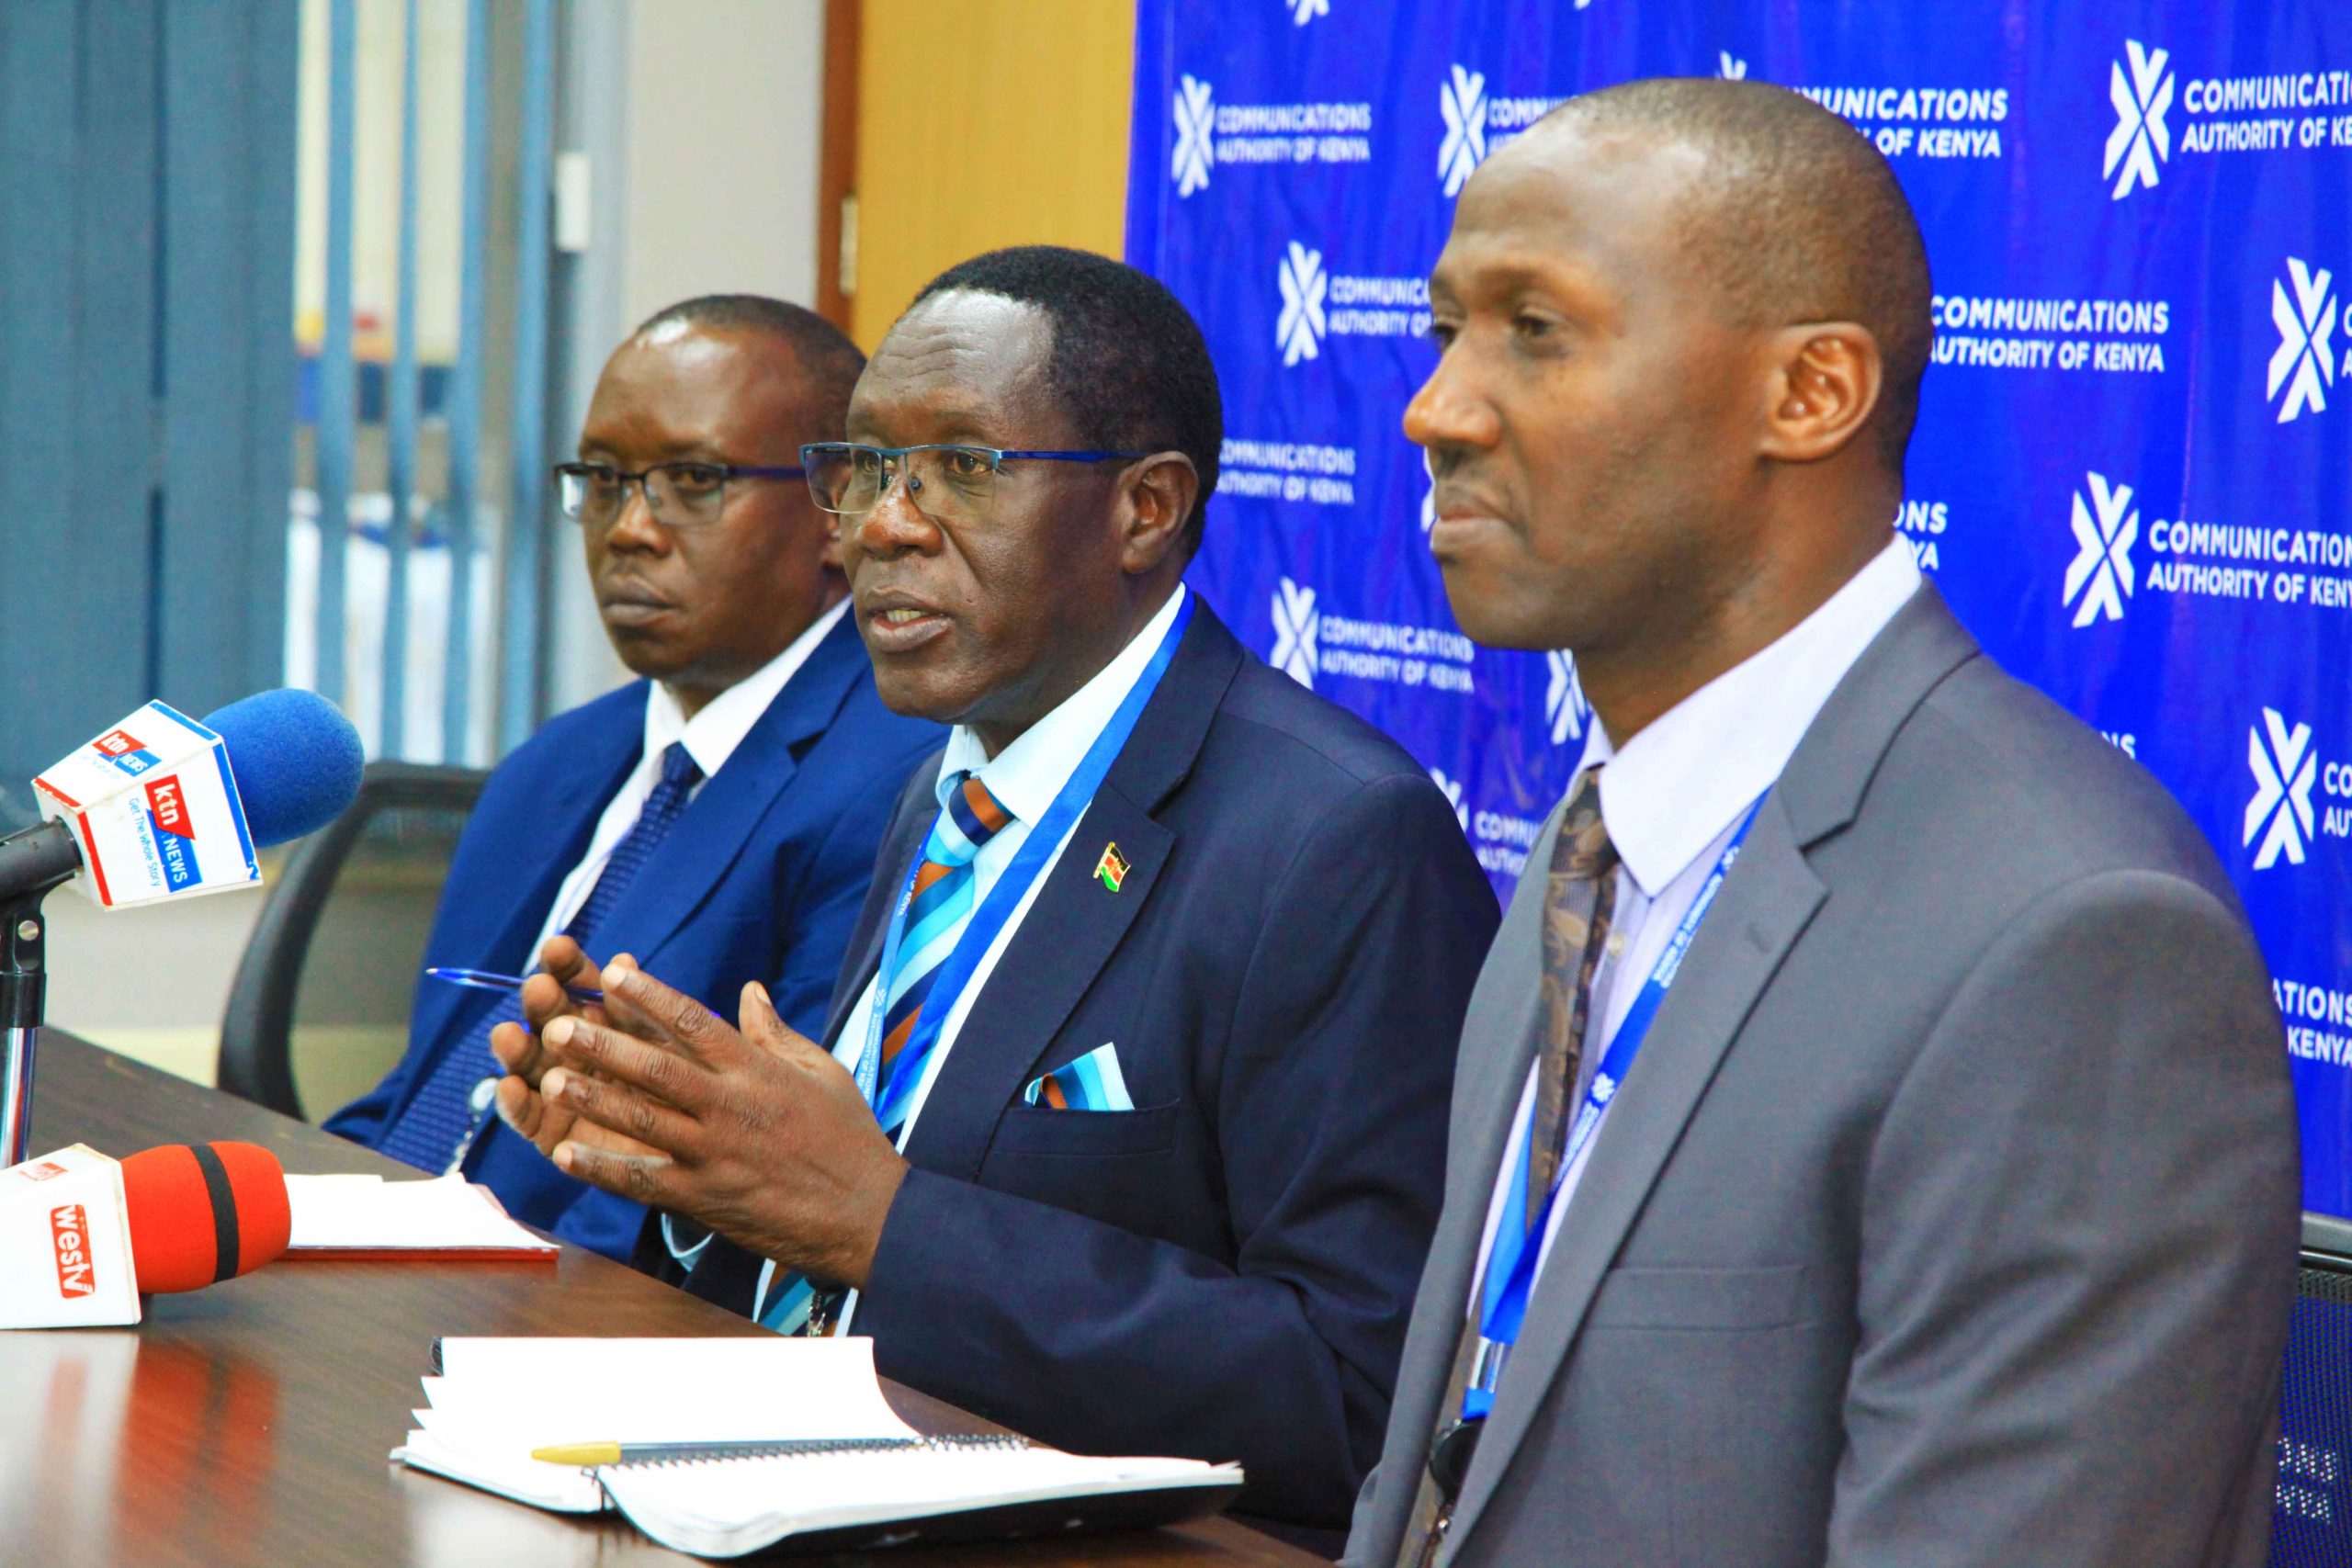 Engineer Francis Wangusi (centre), addresses the press during the launch